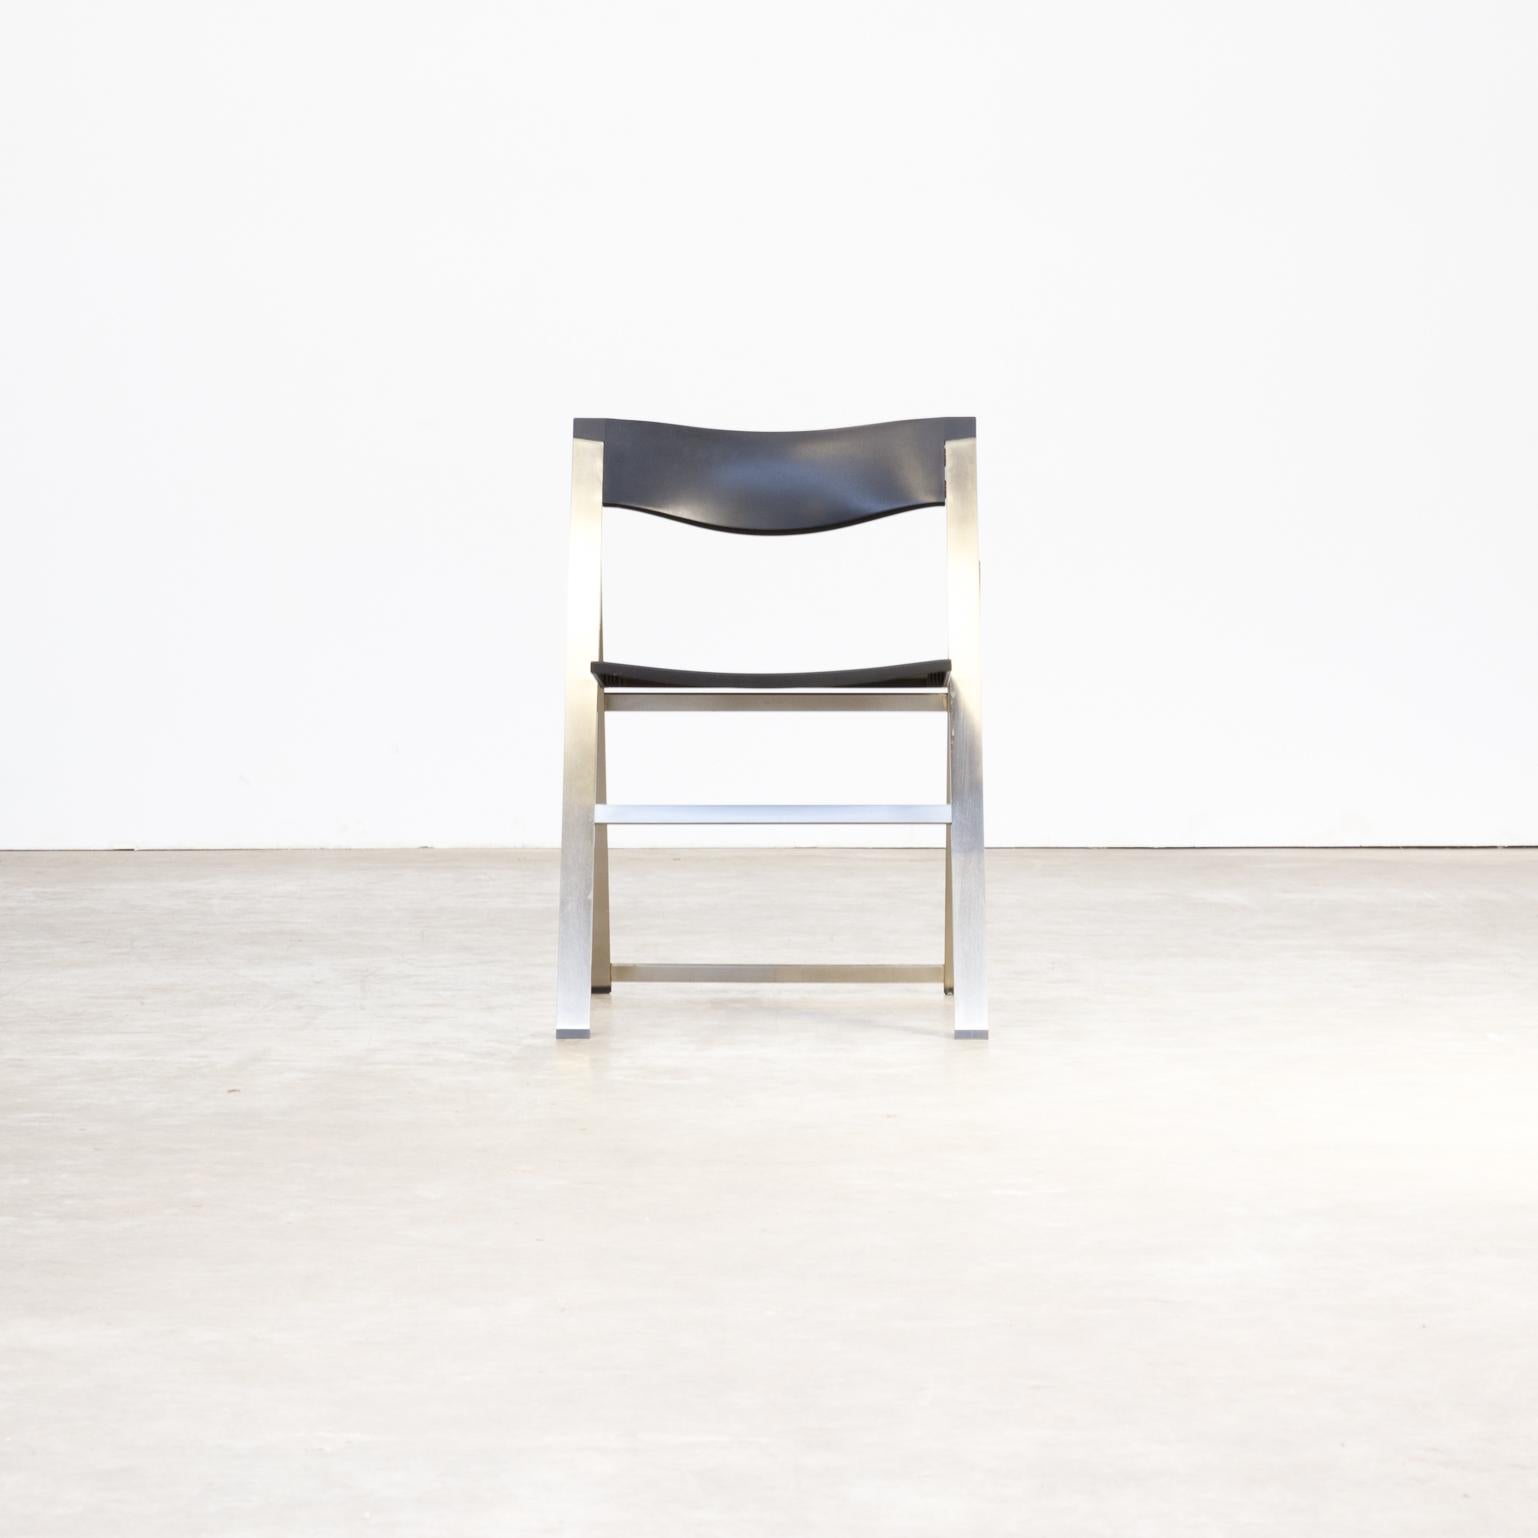 Late 20th Century 1990s, Justus Kolberg ‘P08’ Folding Chair for Tecno Set of 4 For Sale